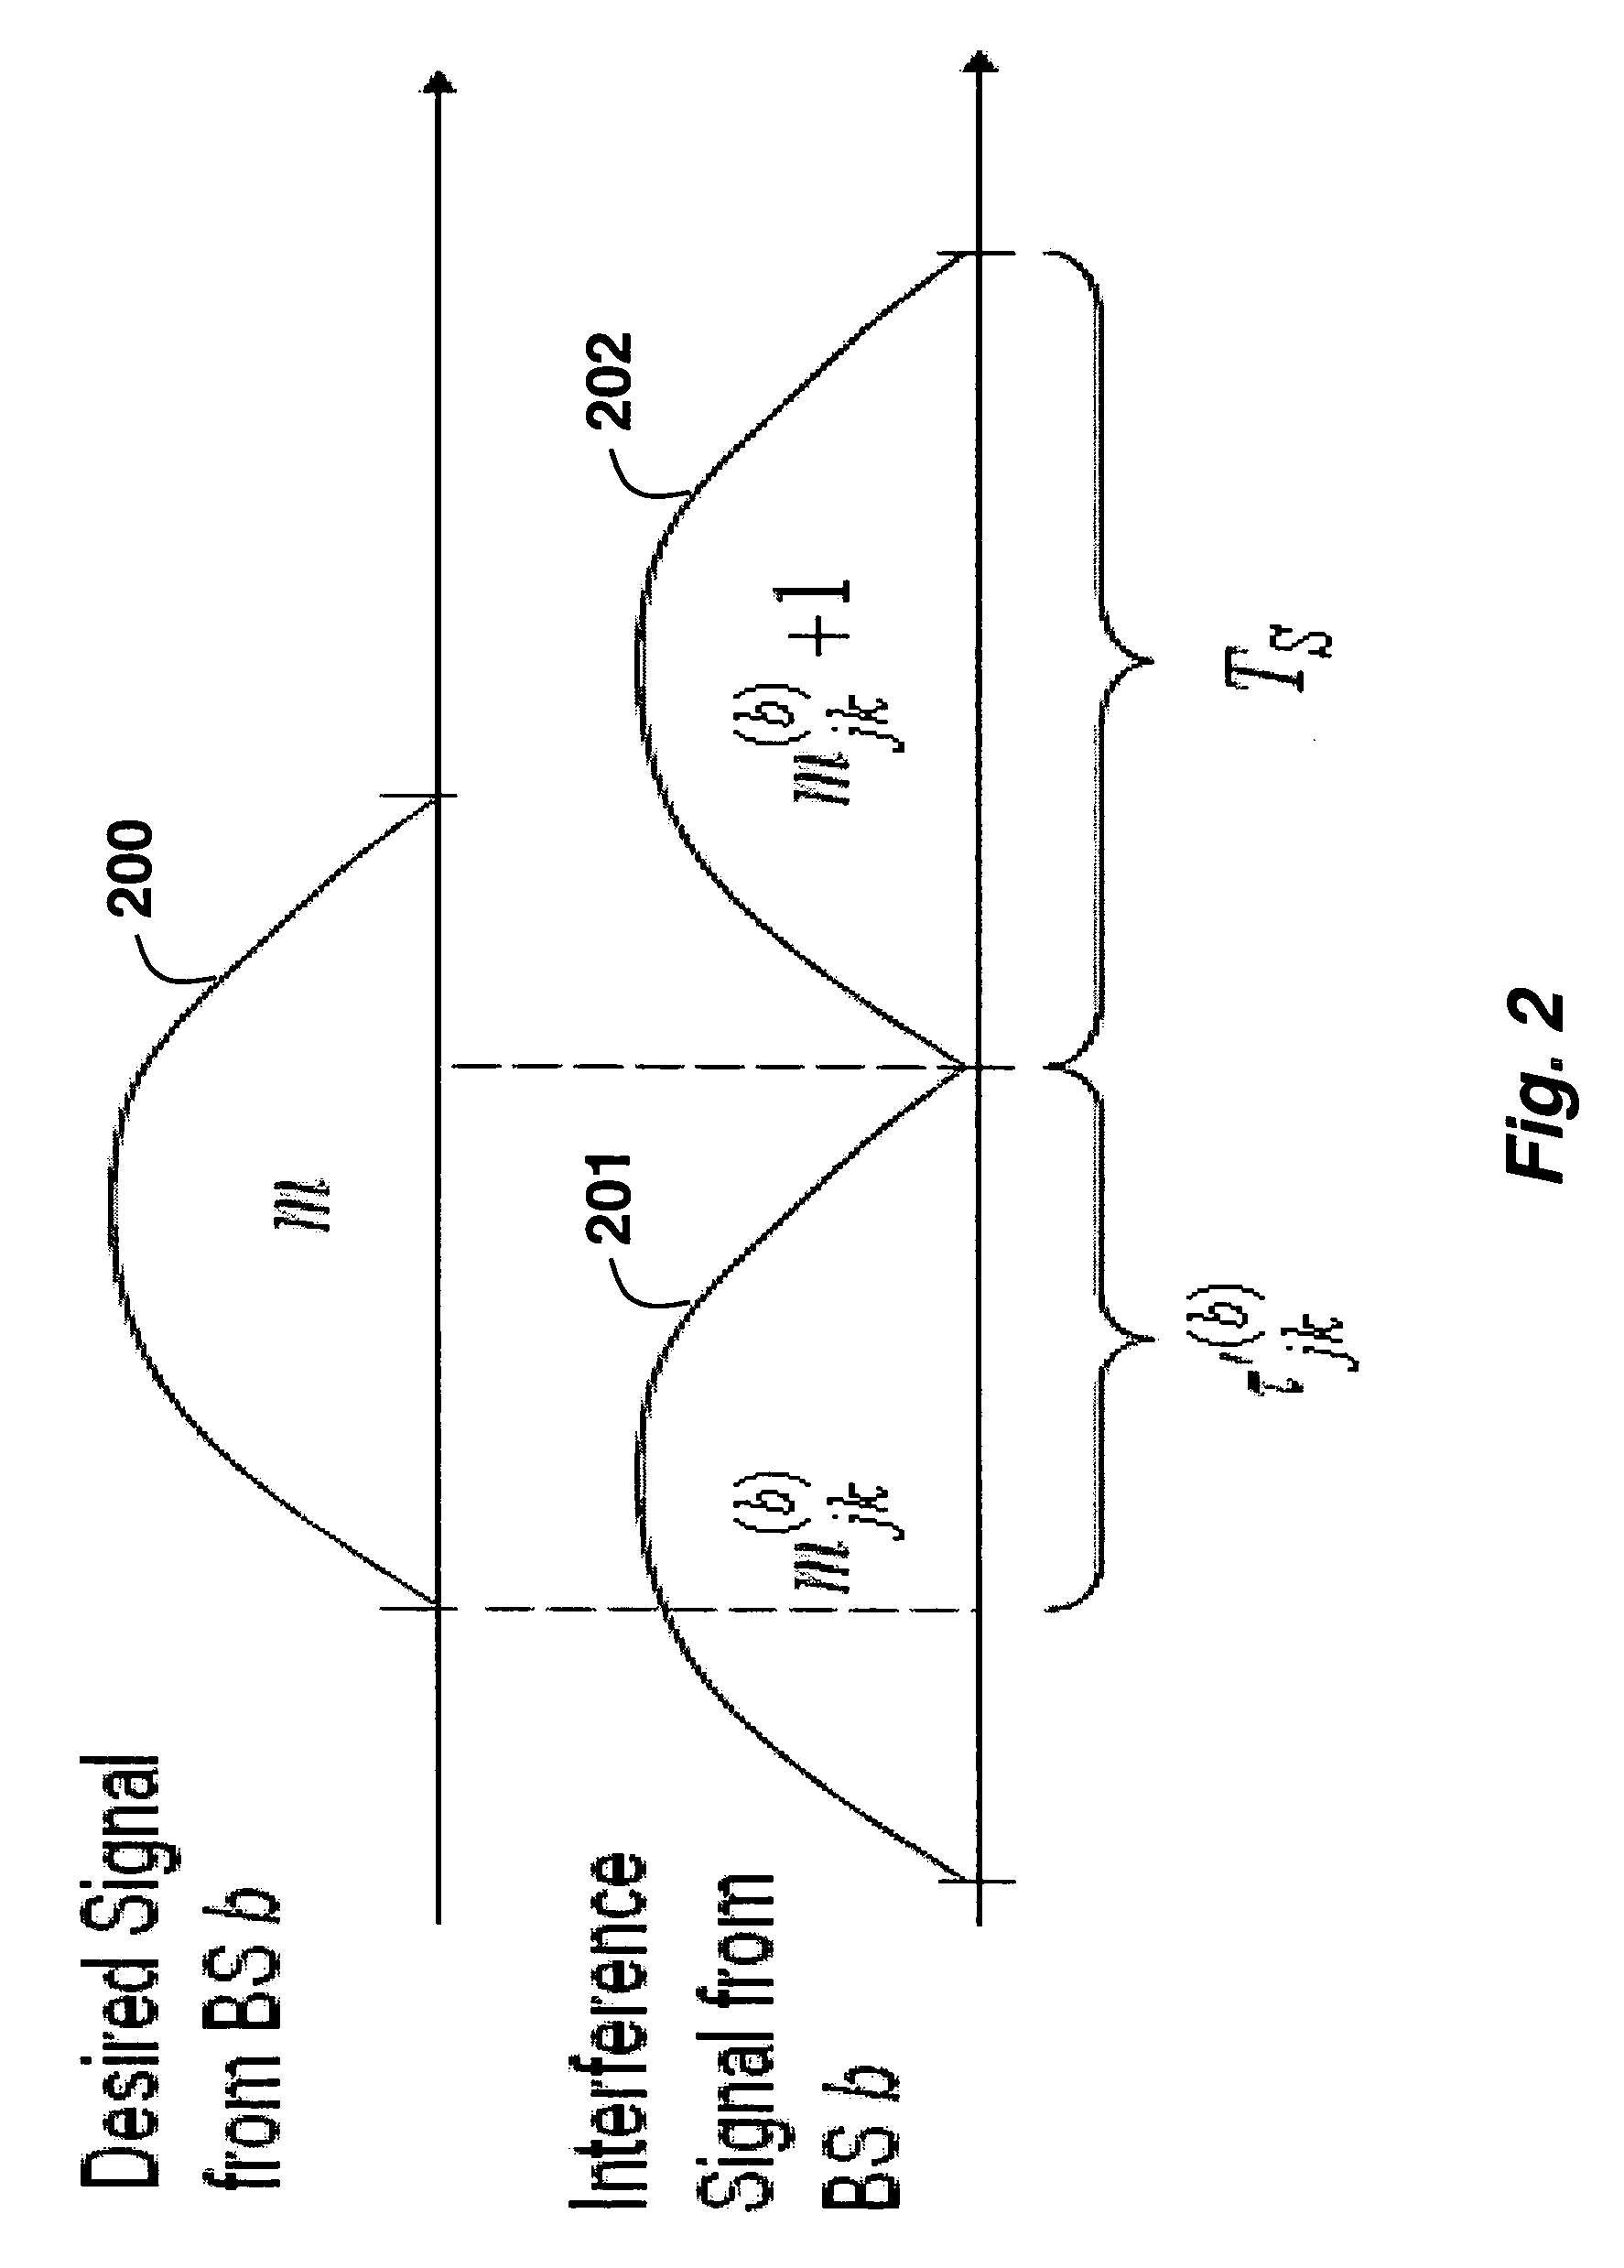 System and method for transmitting signals in cooperative base station multi-user MIMO networks